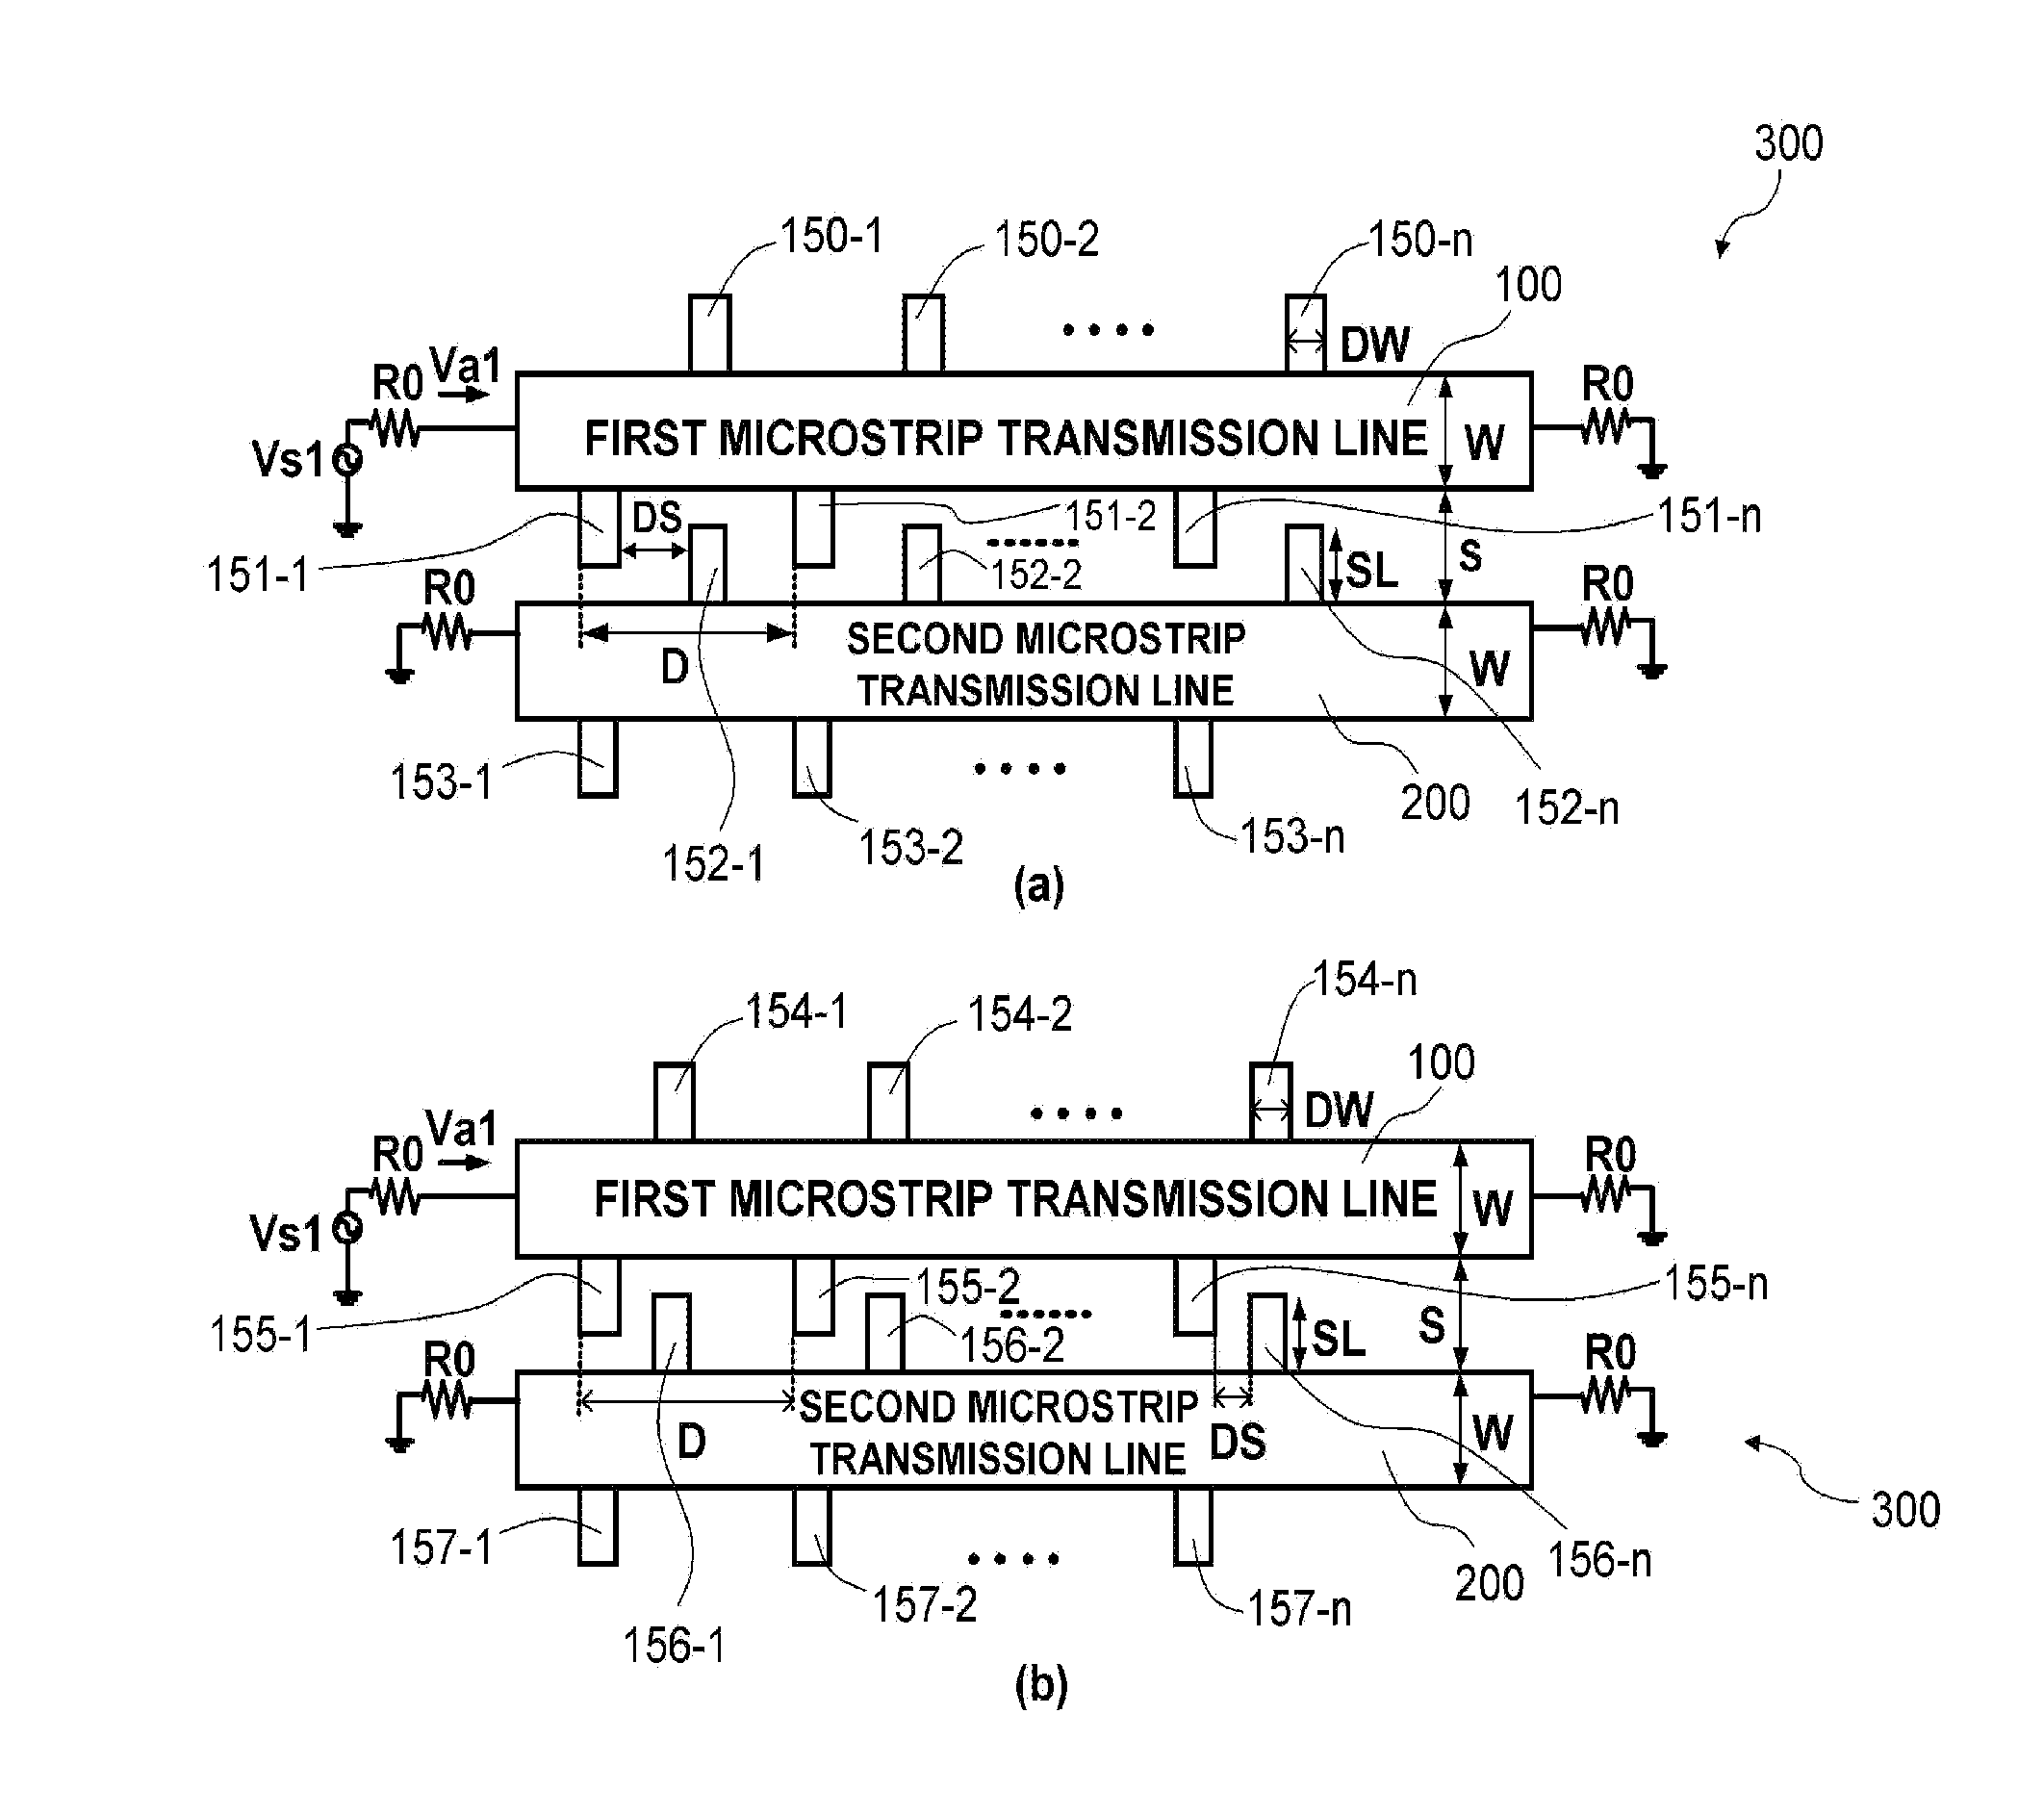 Mictostrip transmission line structure with vertical stubs for reducing far-end crosstalk